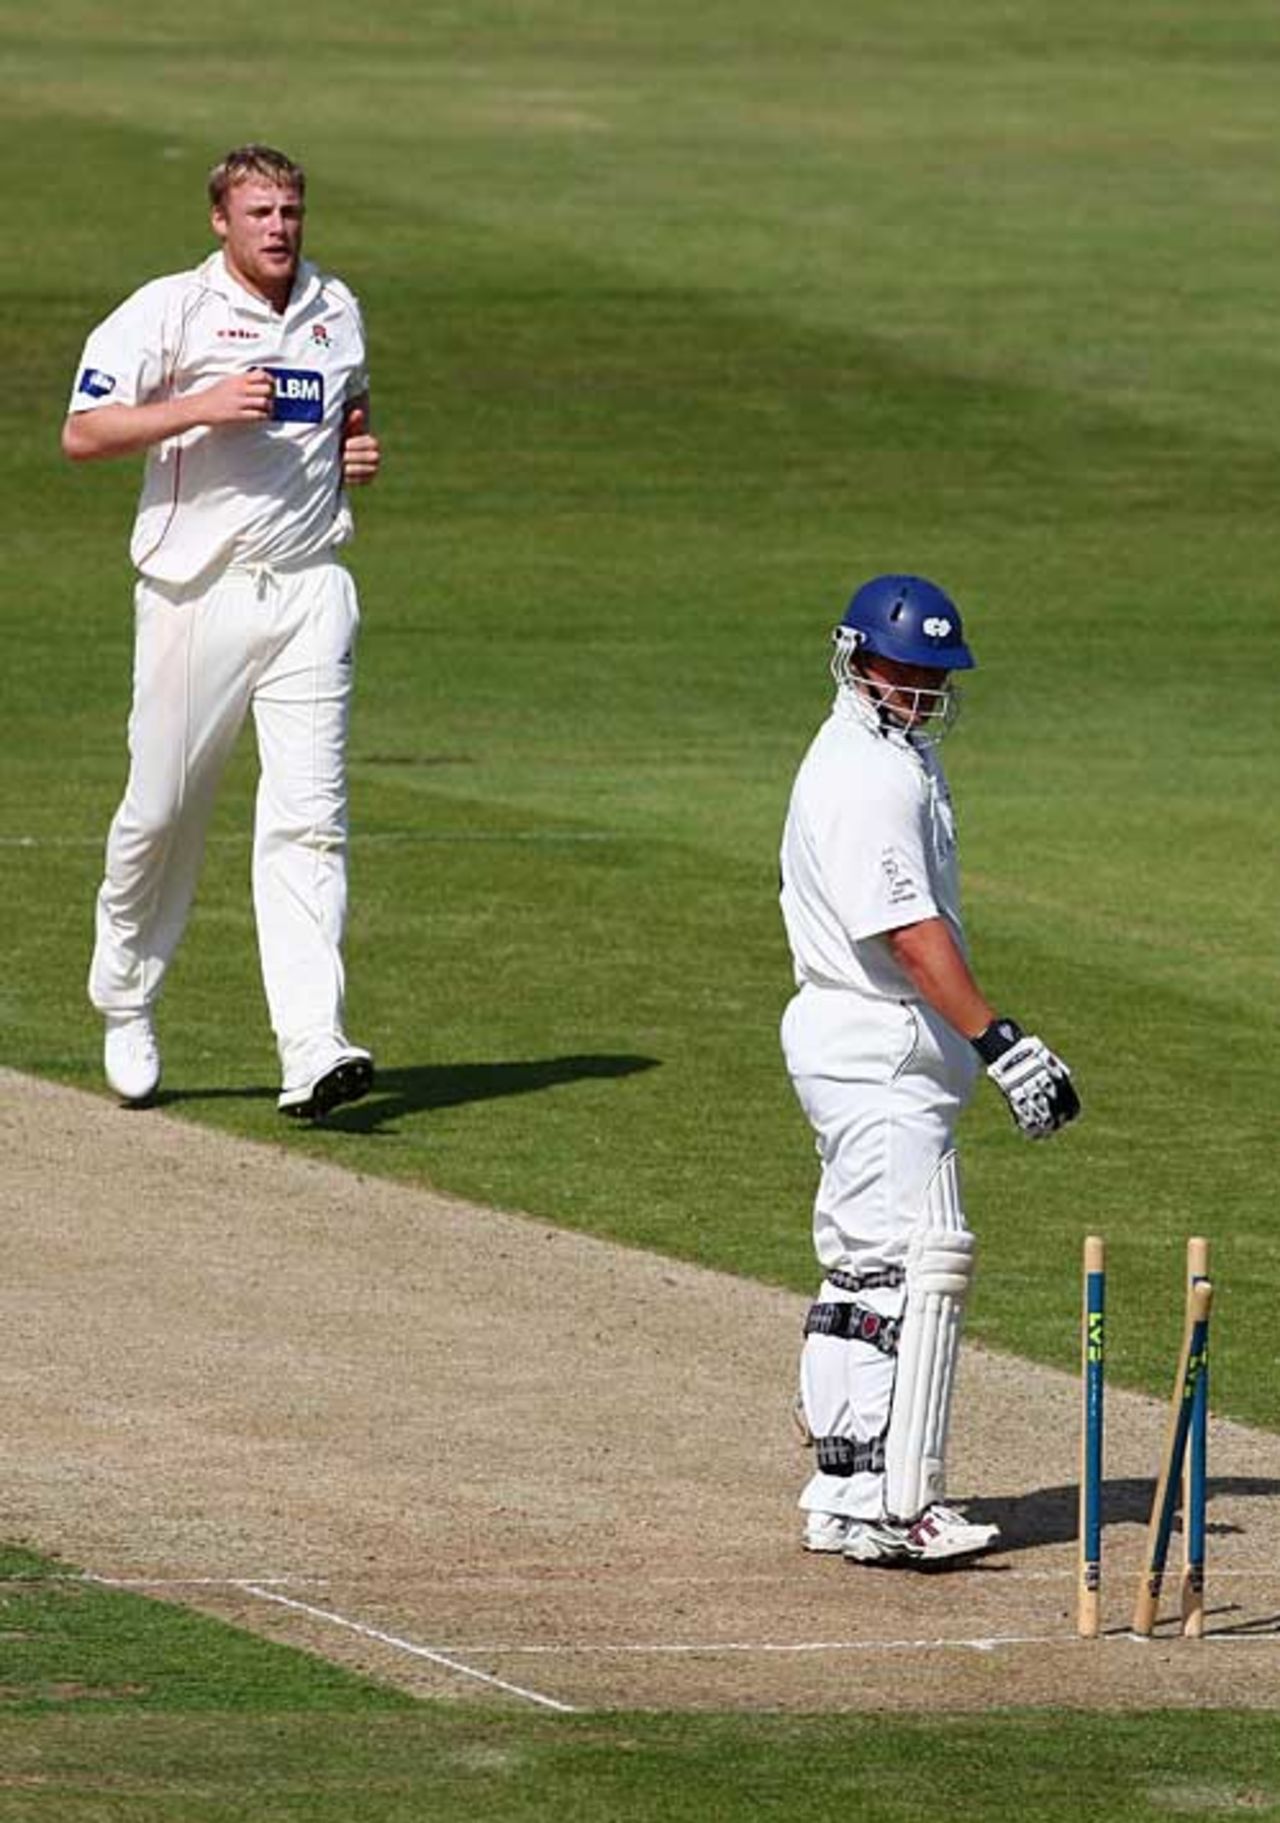 Darren Gough is bowled by Andrew Flintoff, Yorkshire v Lancashire, County Championship, Headingley, August 9, 2007